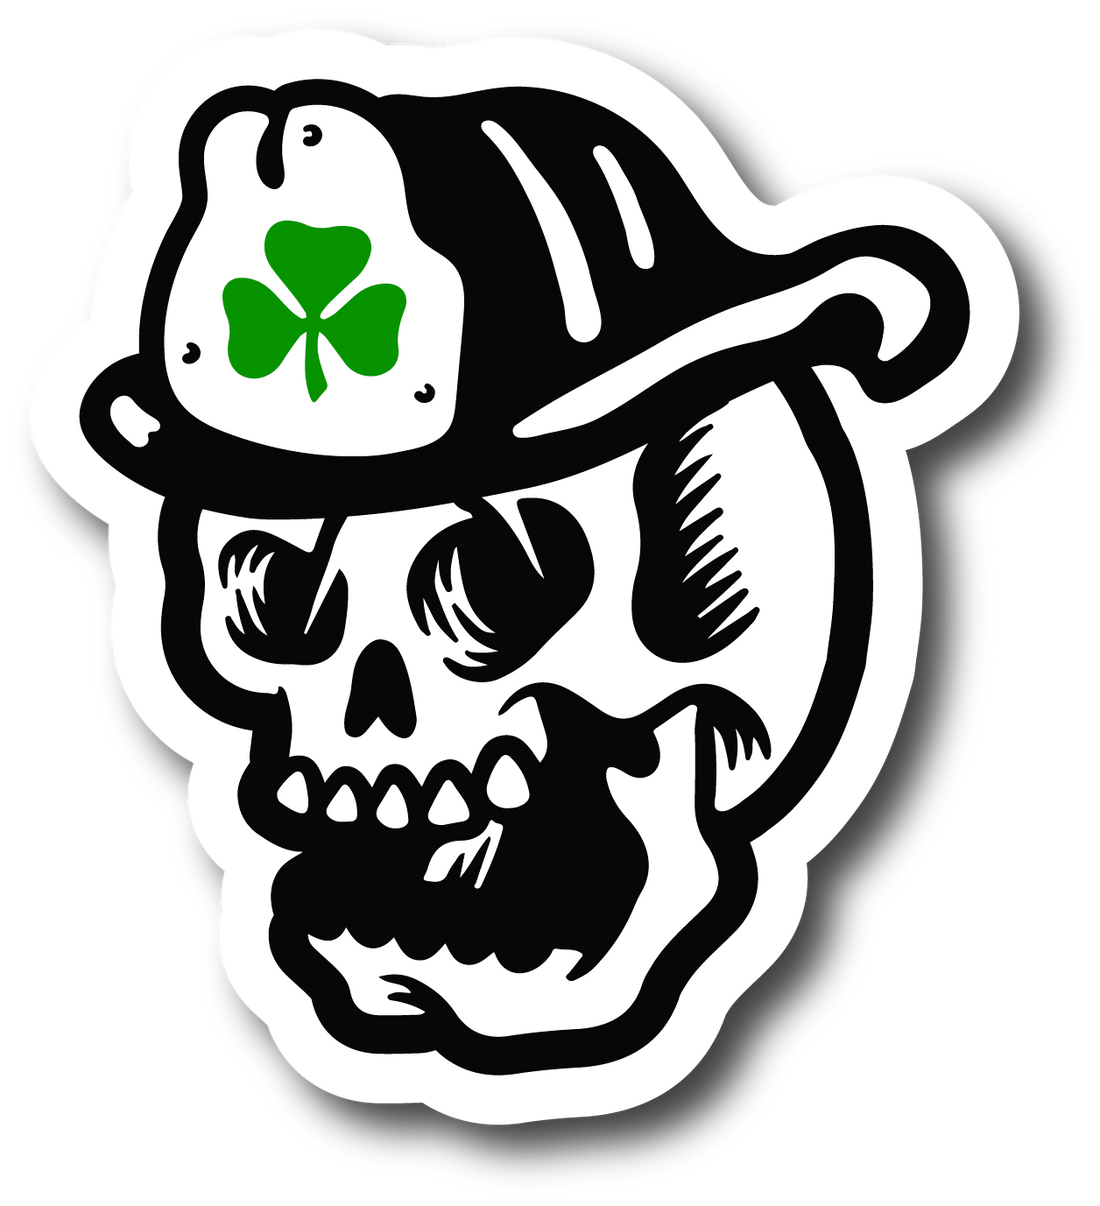 H.C. Clover Decal